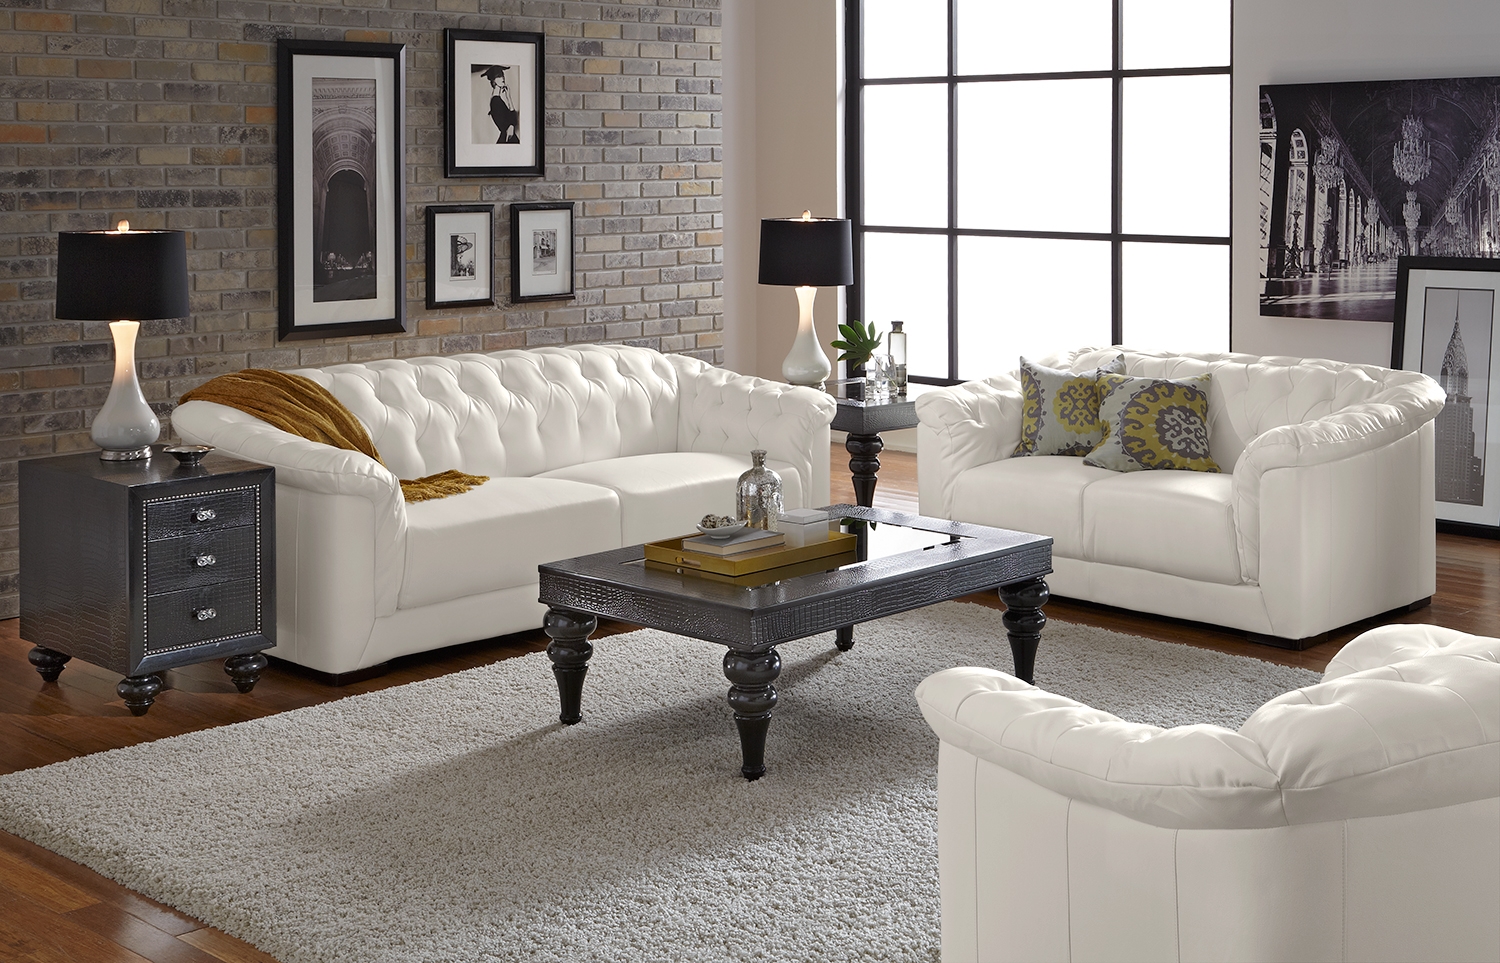 Luxury White Tufted Leather Sofa Furniture Set With Modern TableAccessories Furniture Elegance Fur Rug Laminated Wooden FLoor Furniture + Accessories